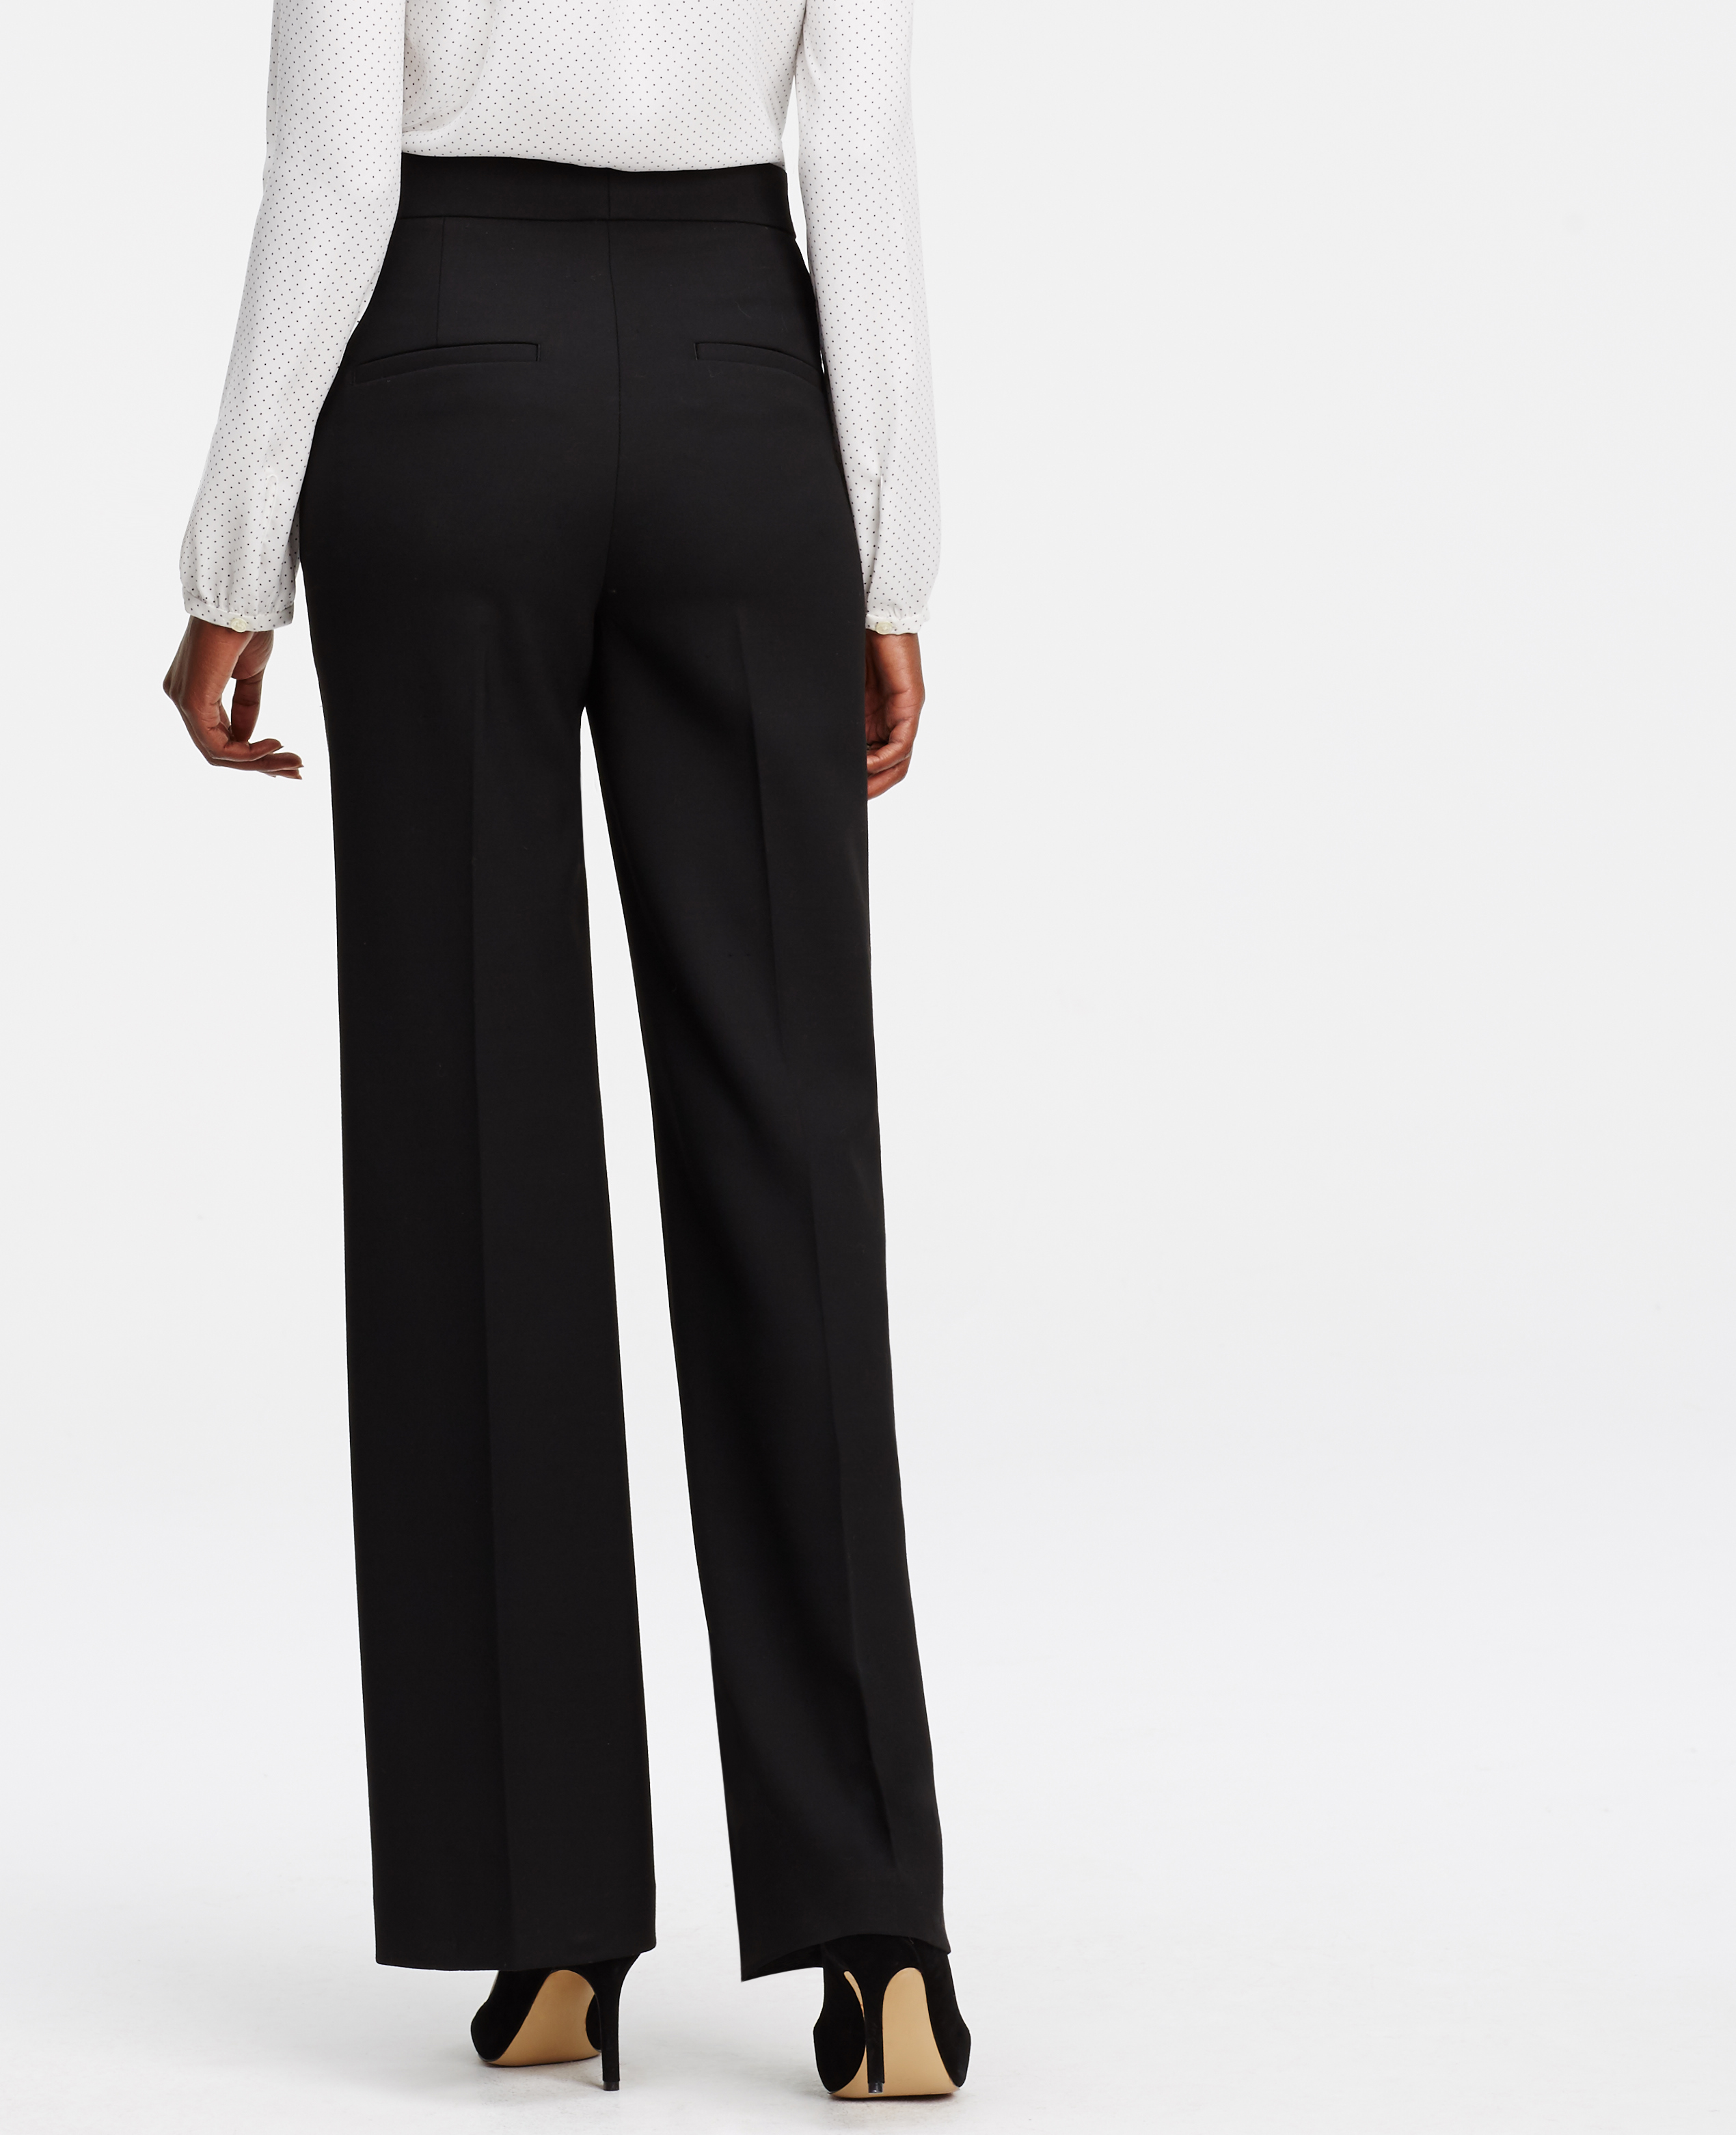 Ann Taylor Petite High Waisted Wide Leg Trousers in Black - Lyst